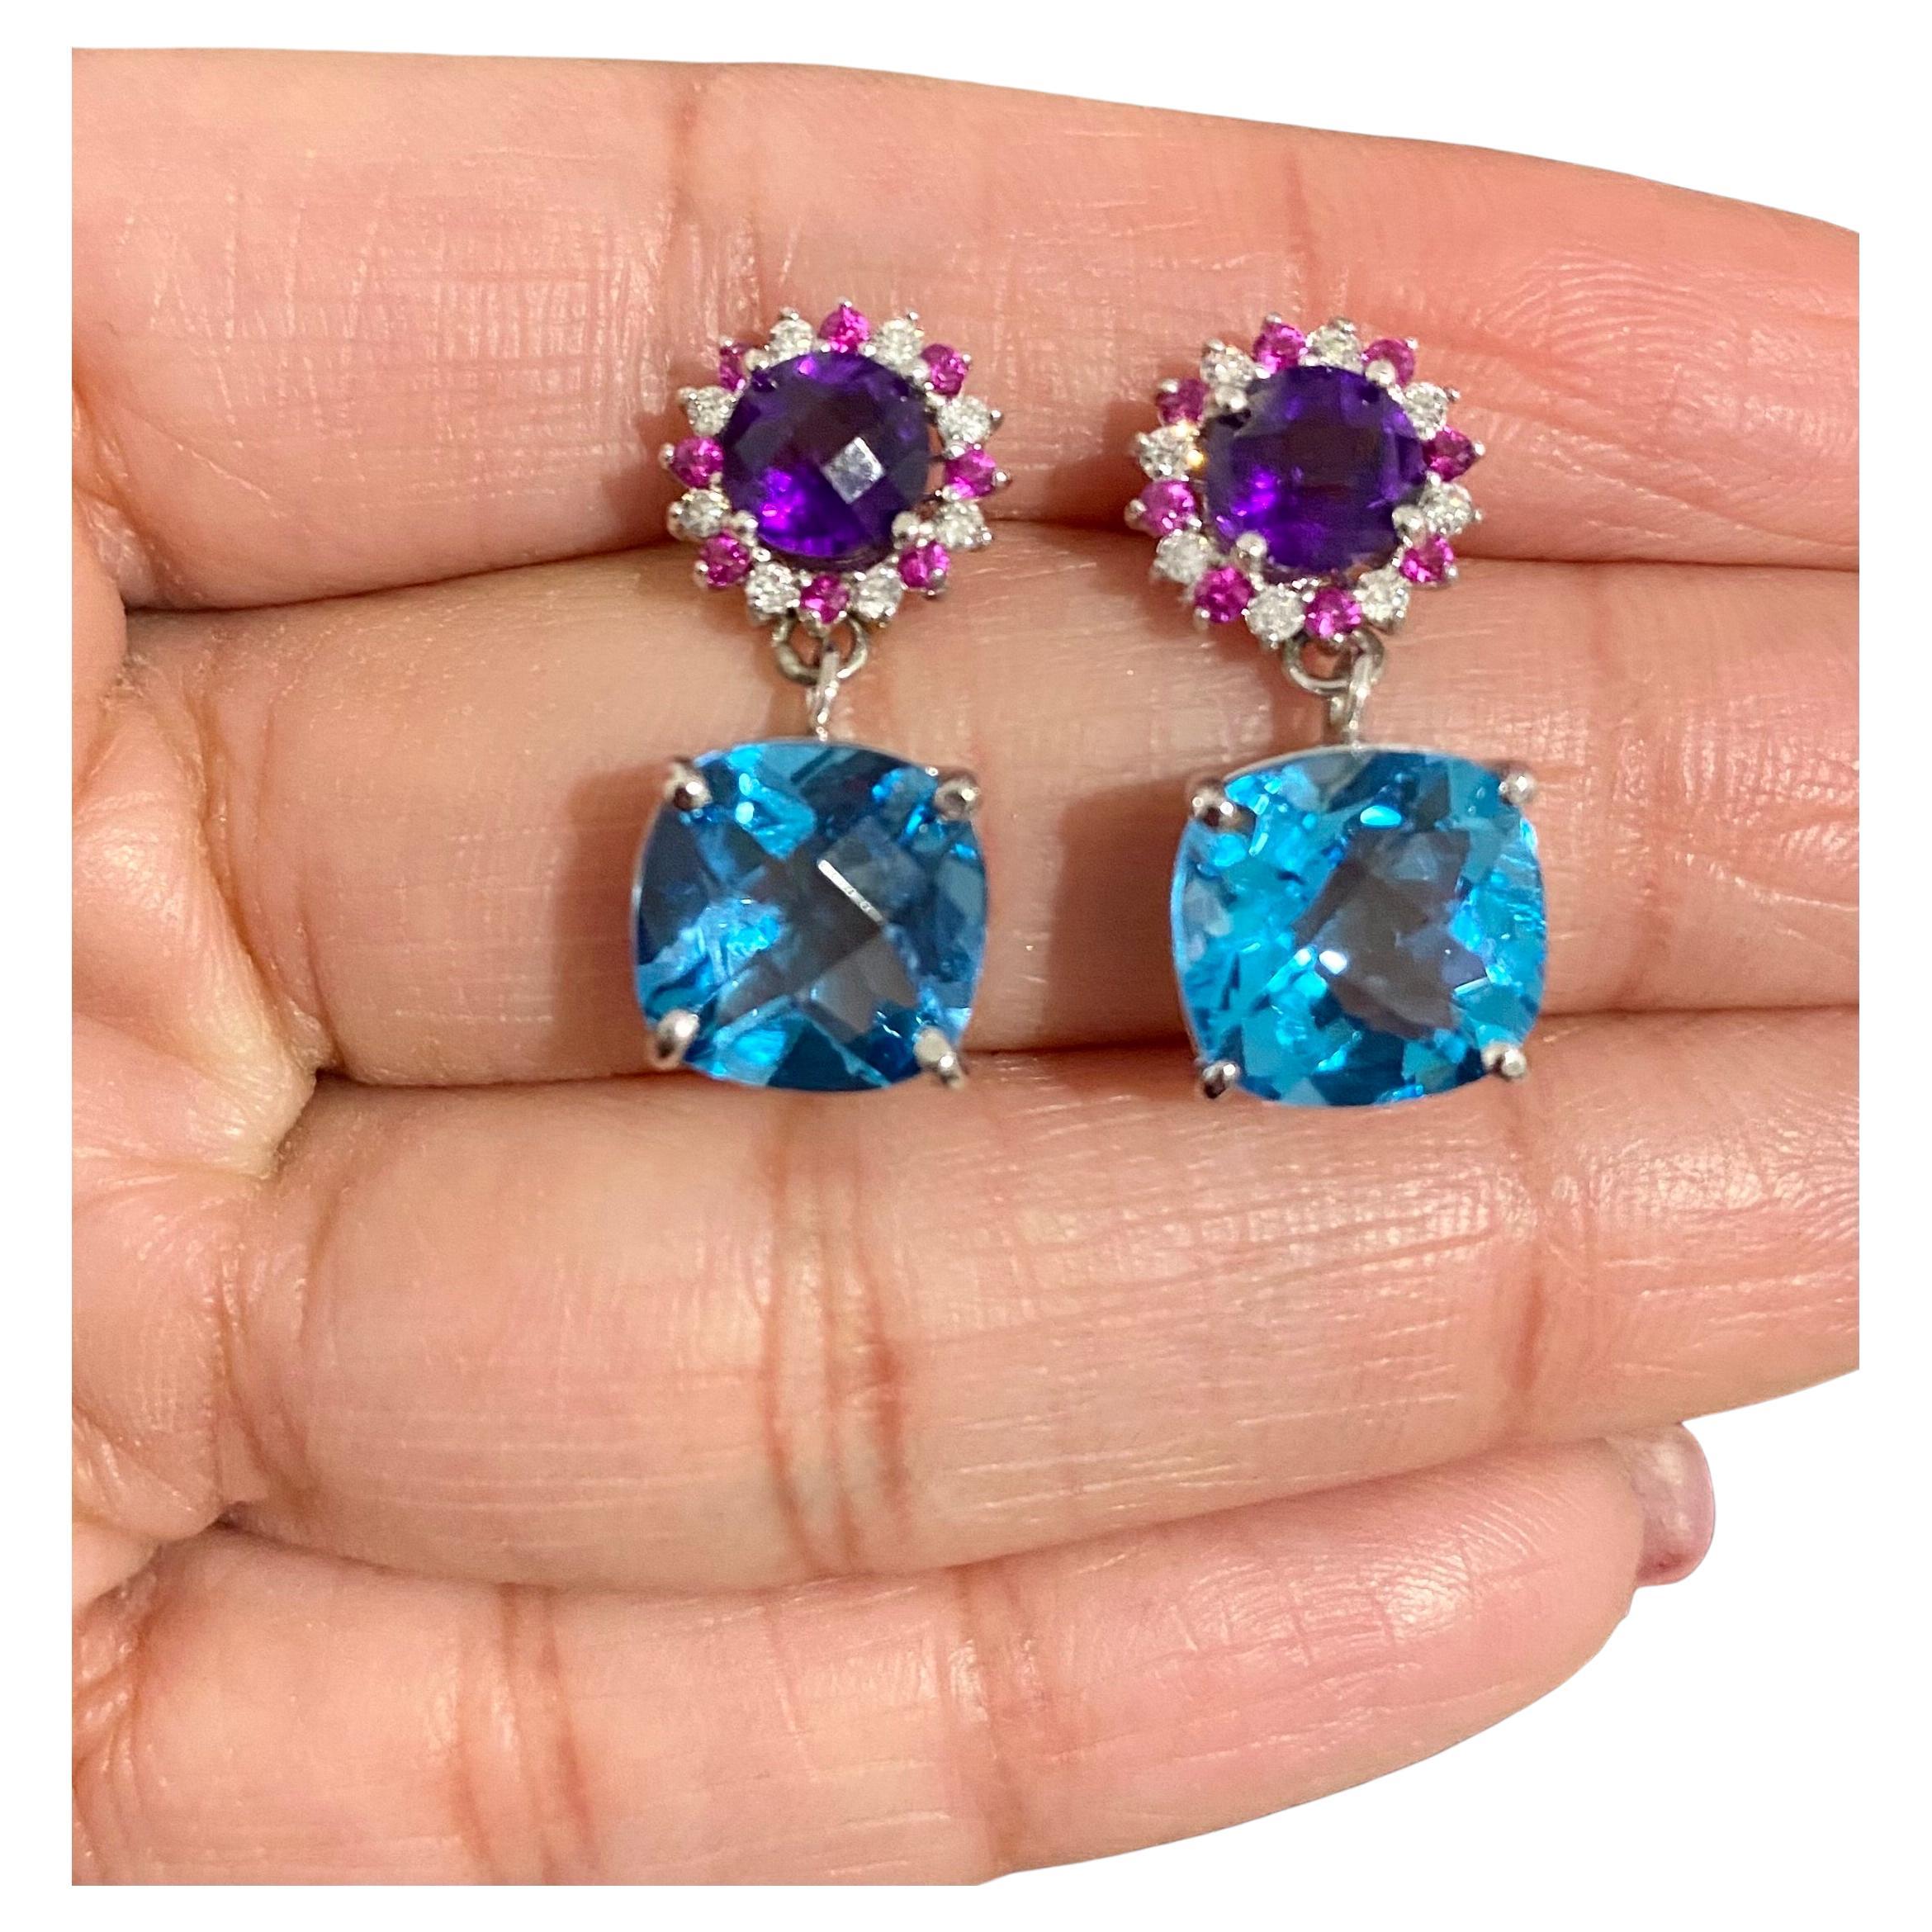 10.87 Carat Natural Amethyst Topaz Sapphire White Gold Drop Earrings

These vibrant Earrings have 2 large Cushion Cut Blue Topaz that weigh 8.81 carats and are embellished with 2 Checkered board cut Amethysts that weigh 1.55 carats and 16 Pink